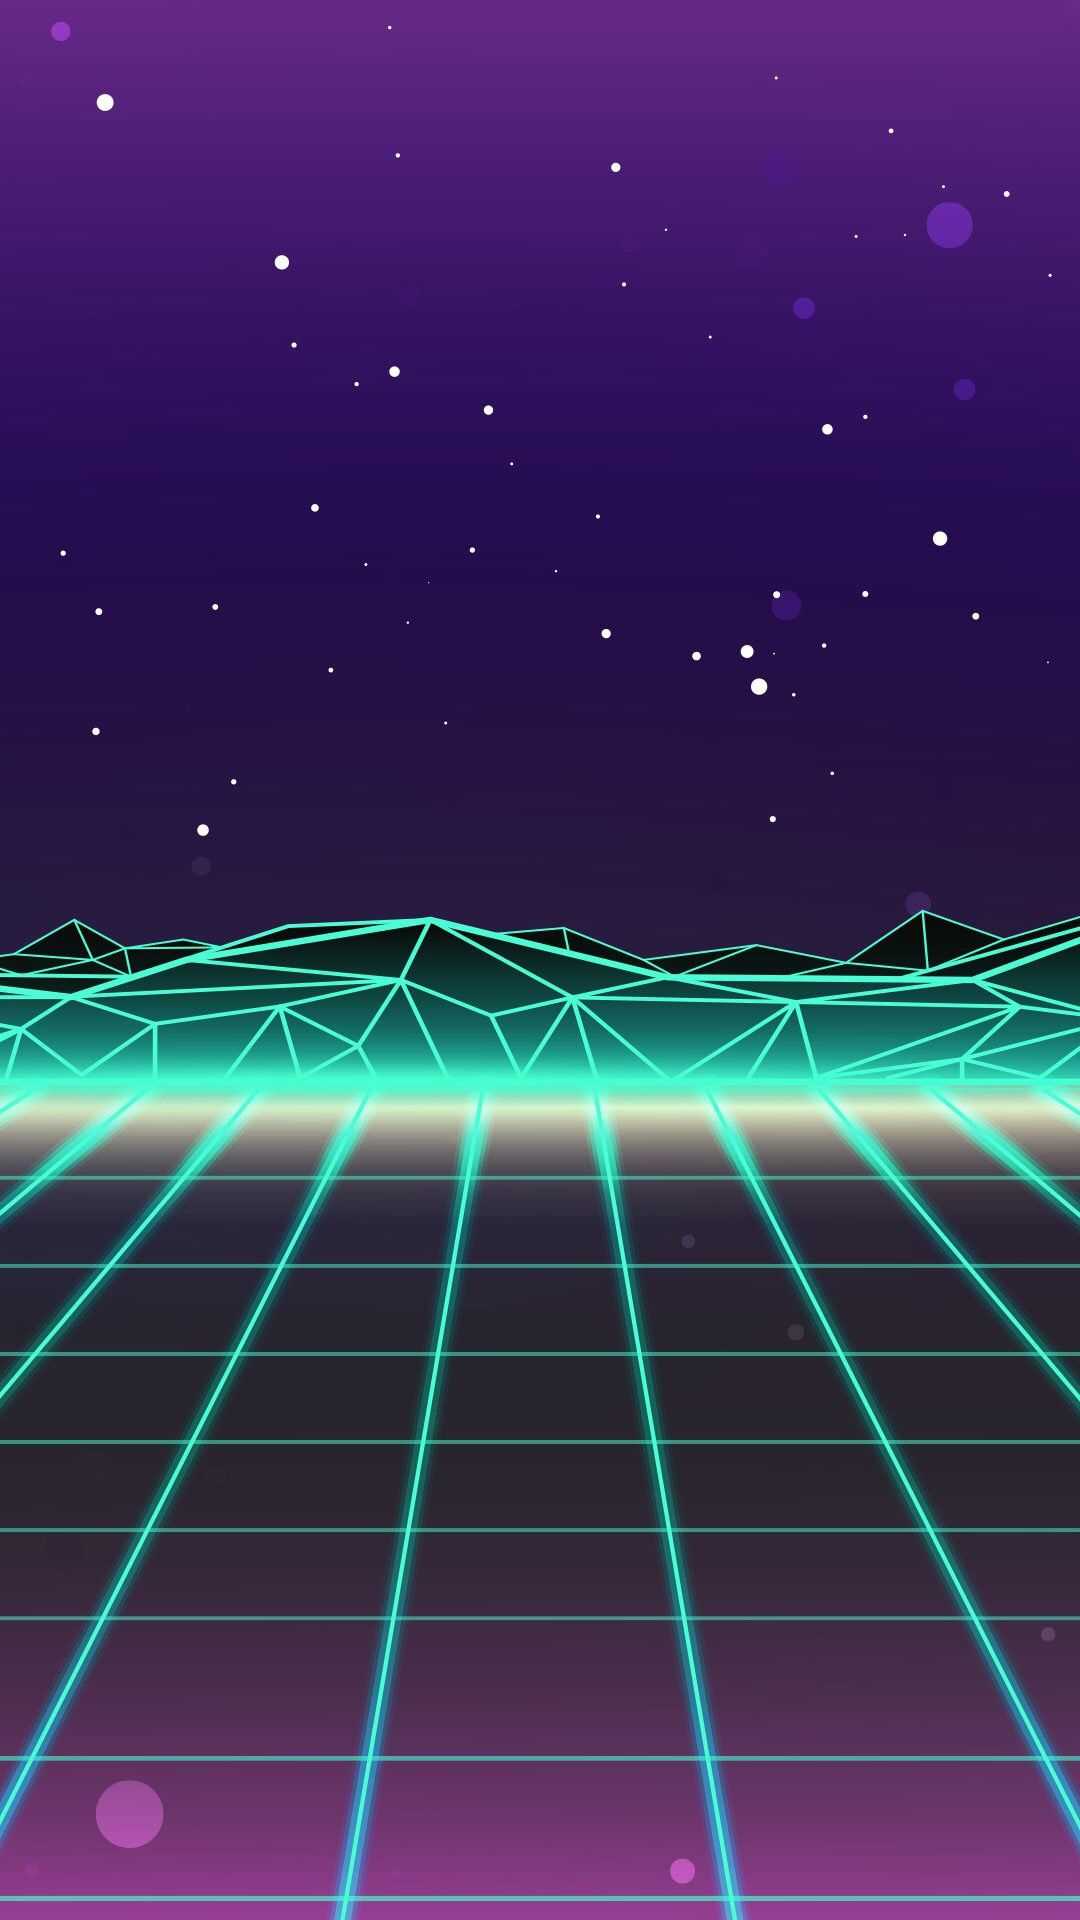 A retro 80s style background with neon lines - Vaporwave